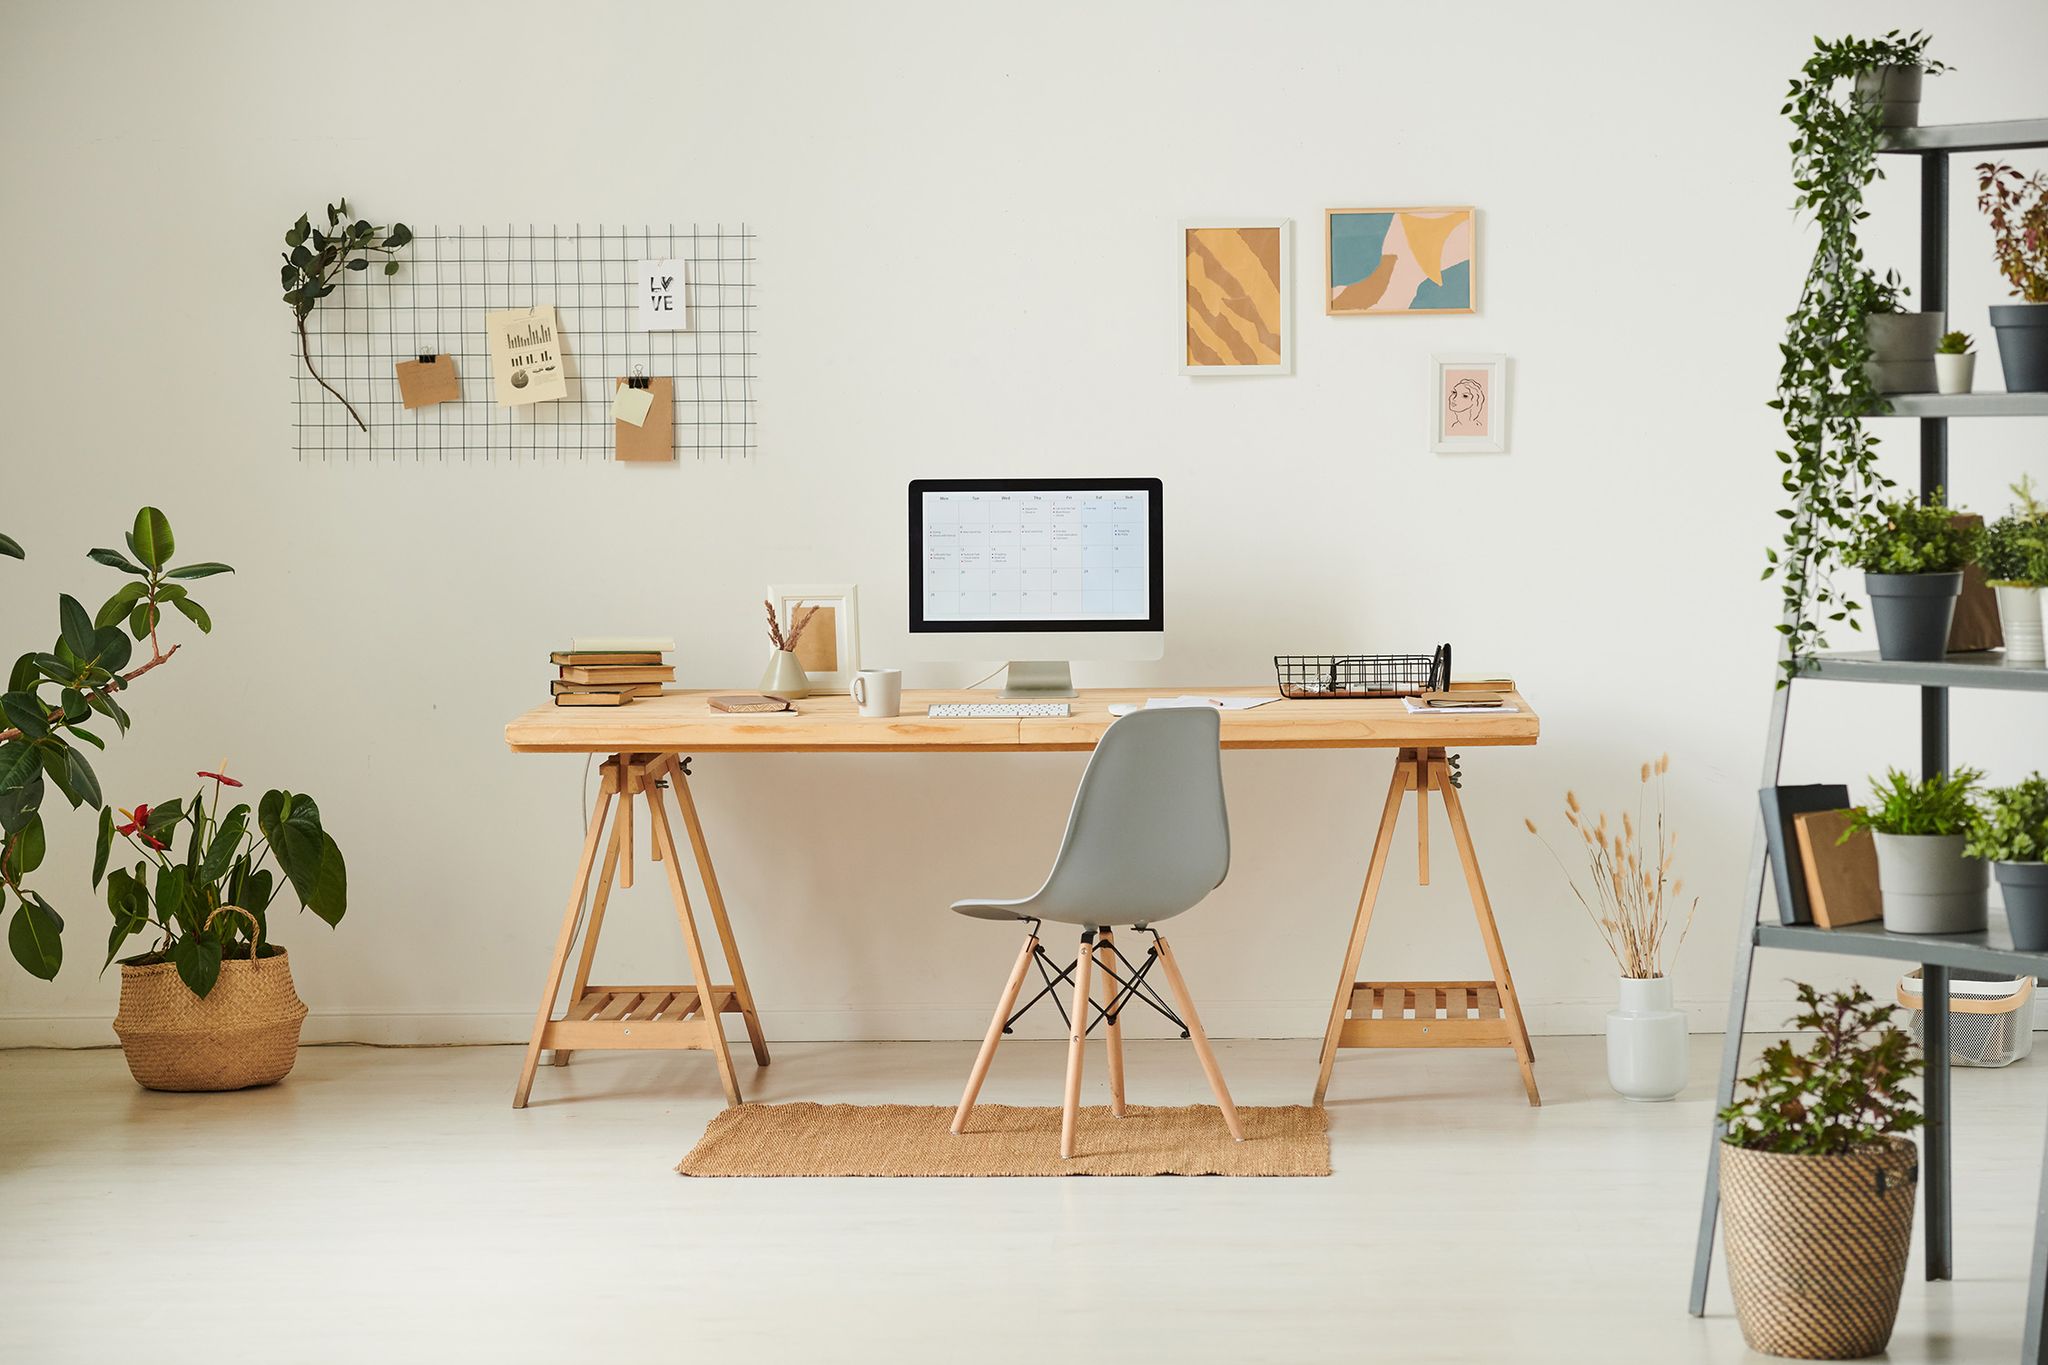 Popular Office Decor Styles And Their Impact